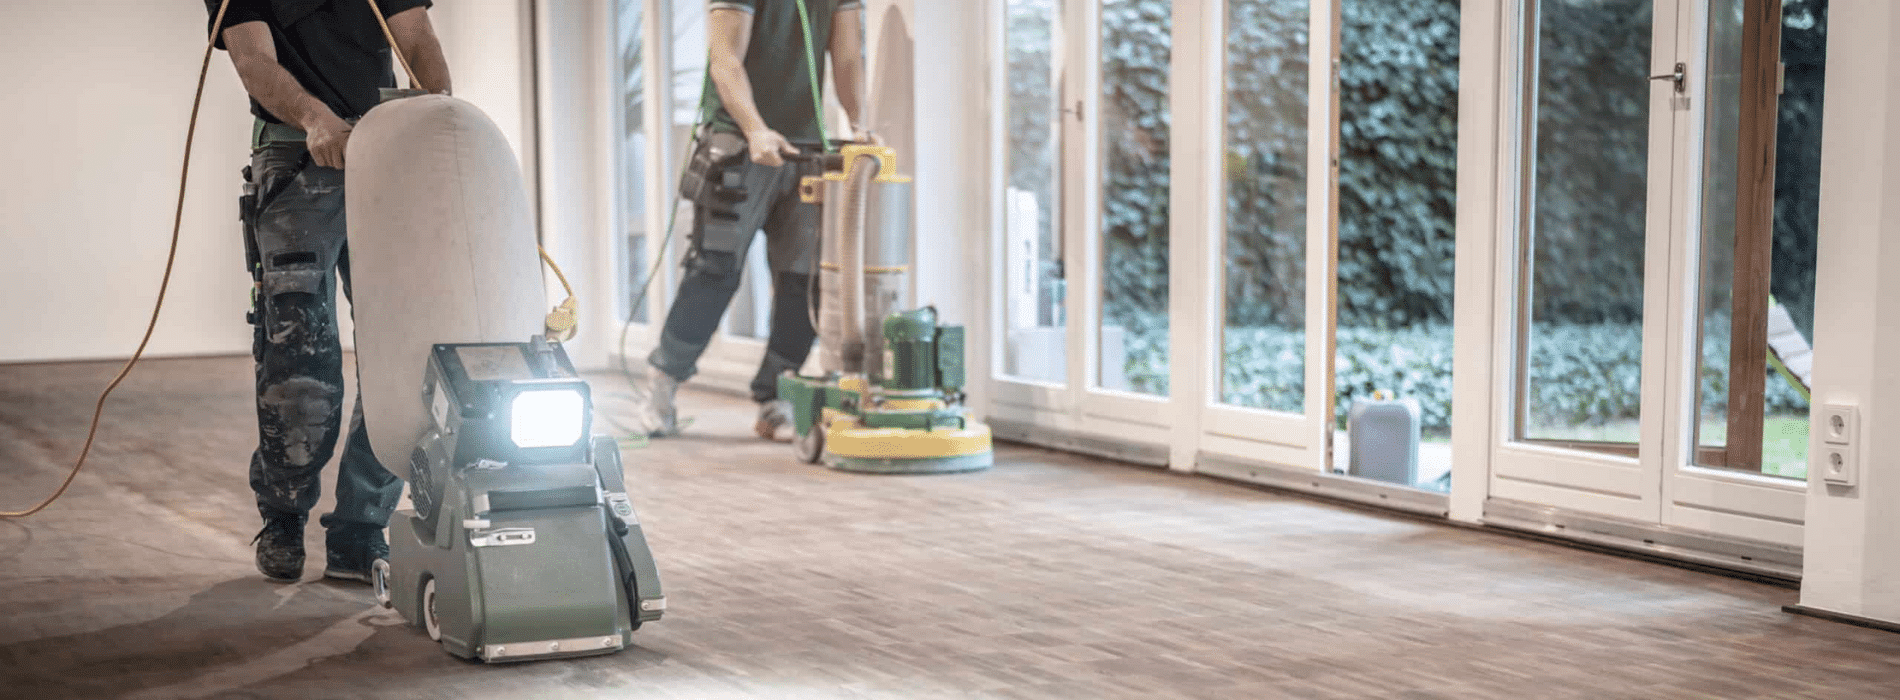 In Chadwell Heath, RM6, Mr Sander® skillfully sanding a herringbone floor using the powerful 2.2 kW Bona belt sander. The 220V, 60Hz machine, sized 250x750 mm, ensures exceptional results. The dust extraction system with HEPA filter guarantees cleanliness and efficiency for a flawless finish.